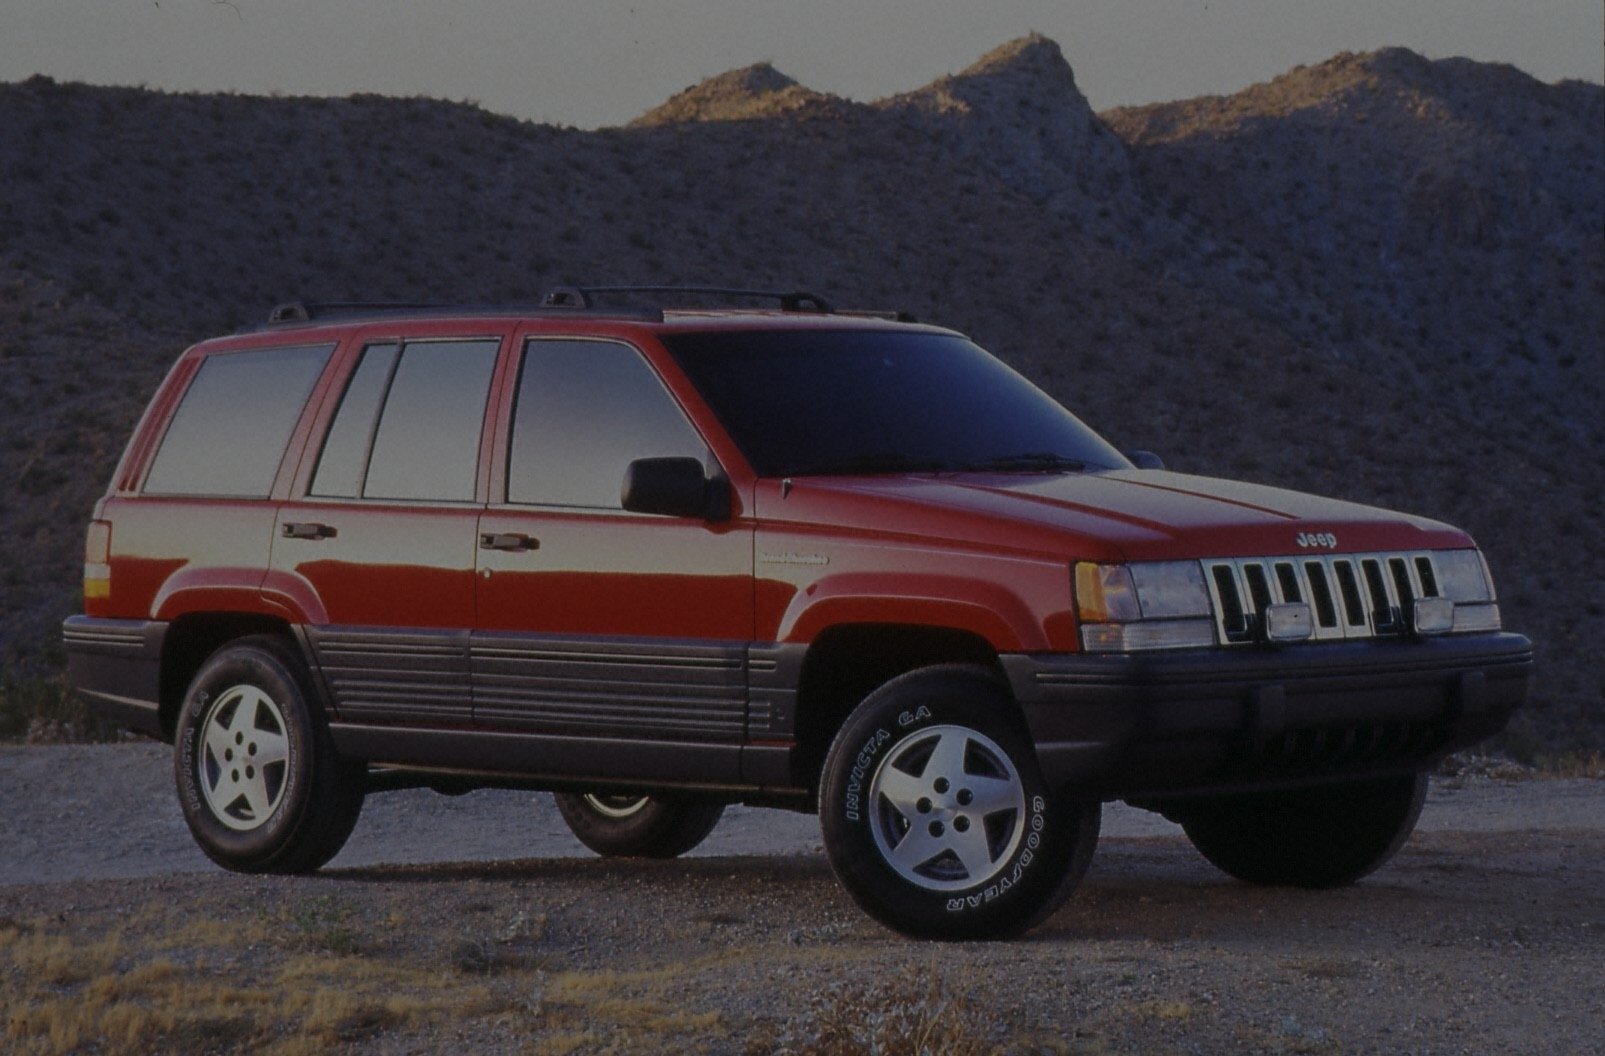 Grand Cherokee ZJ Wheel Alignment Specifications | In4x4mation Center